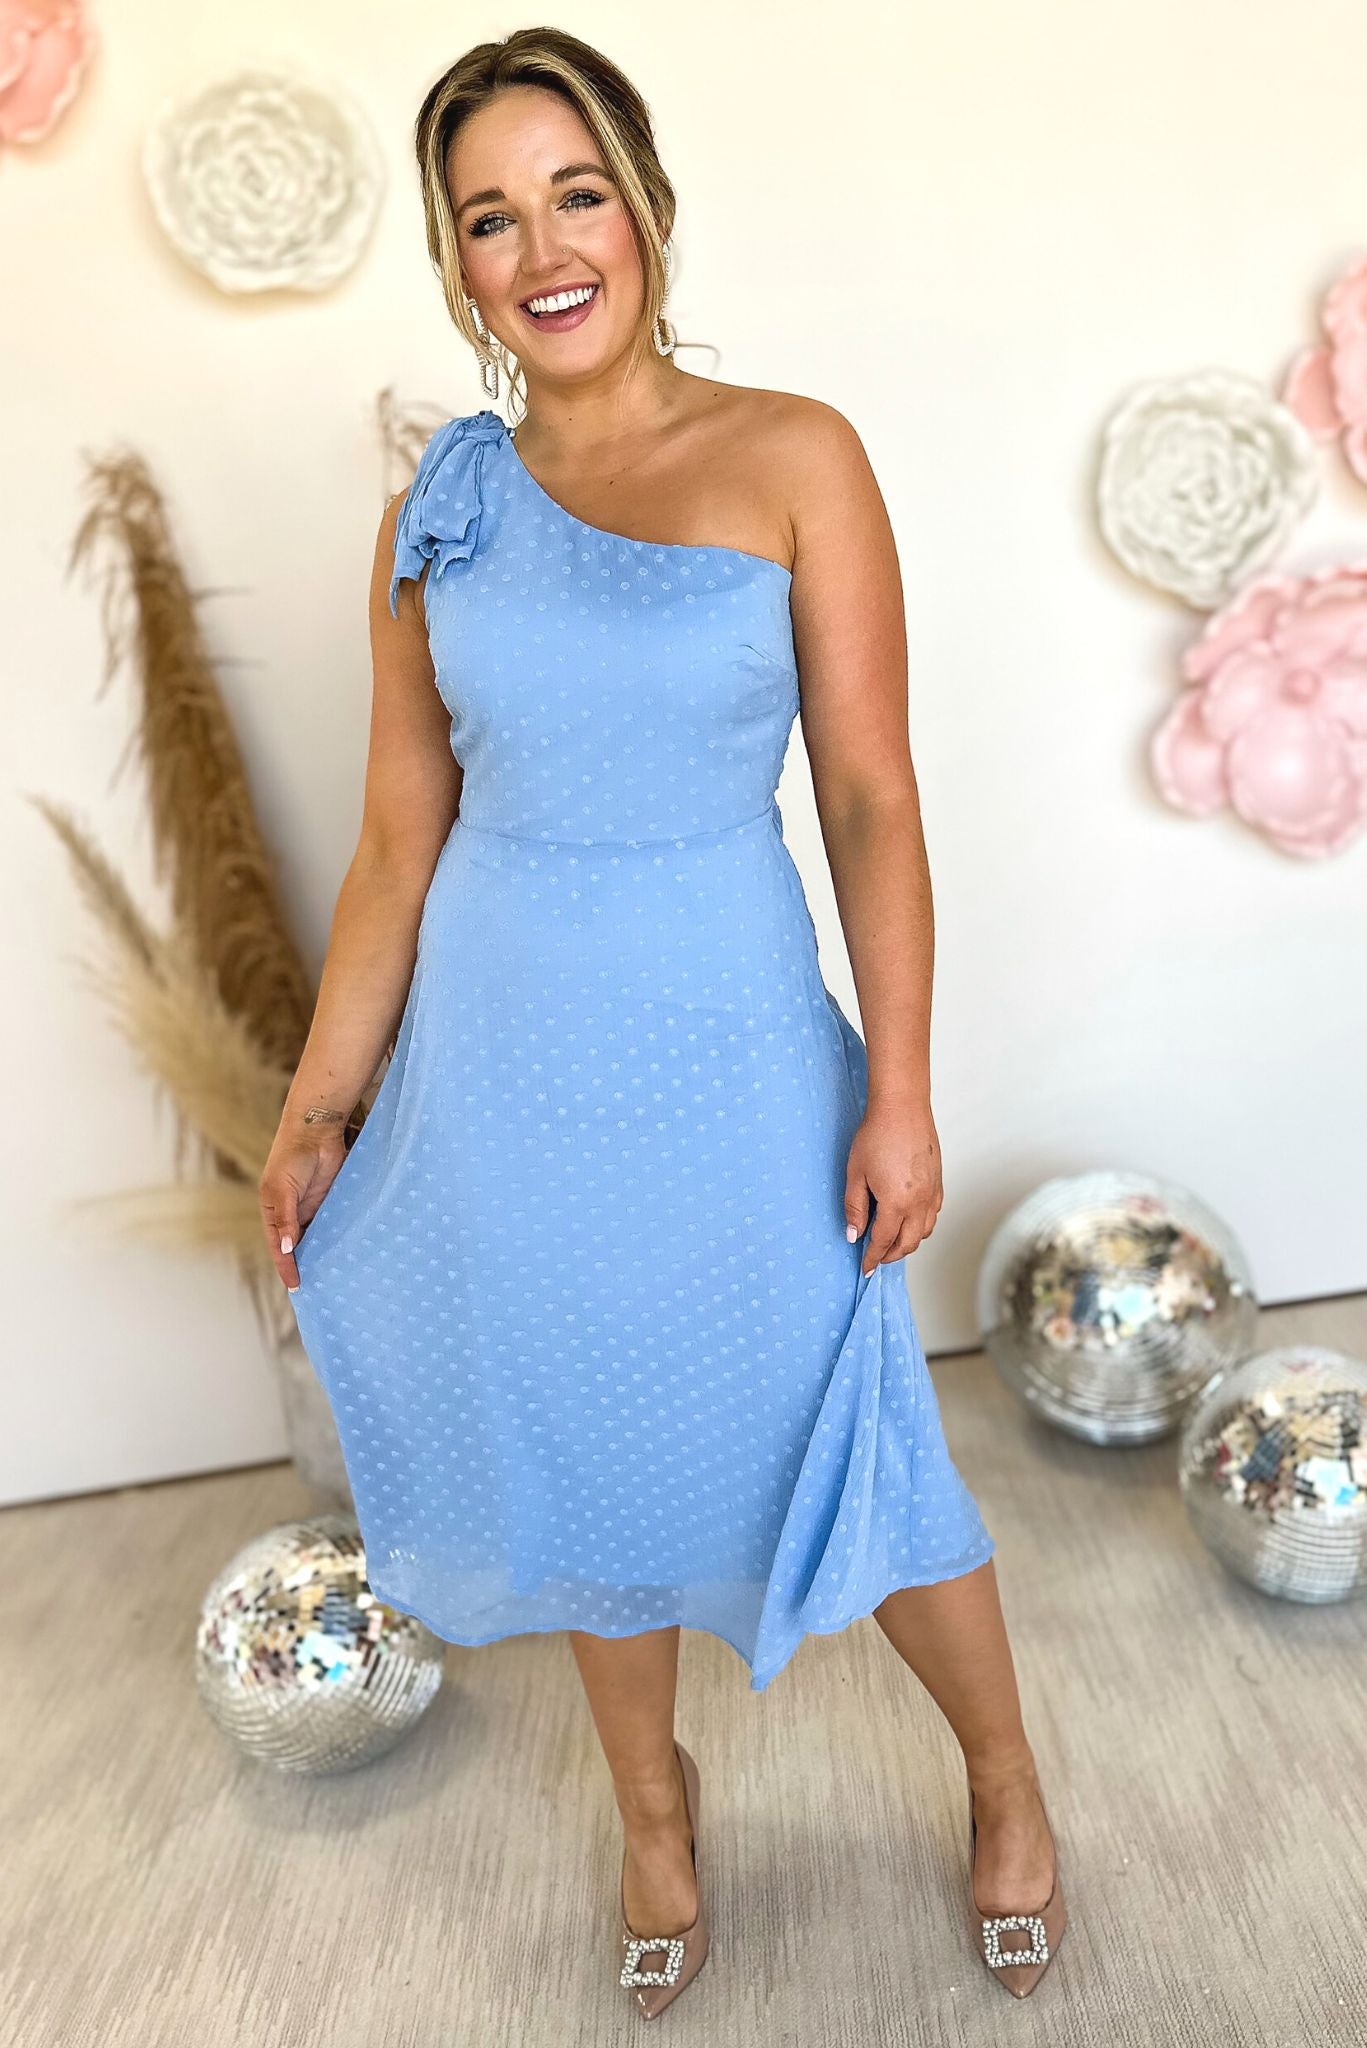 Light Blue Chiffon Swiss Dot One Shoulder Midi Dress, one shoulder, garden party, bow tie detail, swiss dot detail, must have, shop style your senses by mallory fitzsimmons